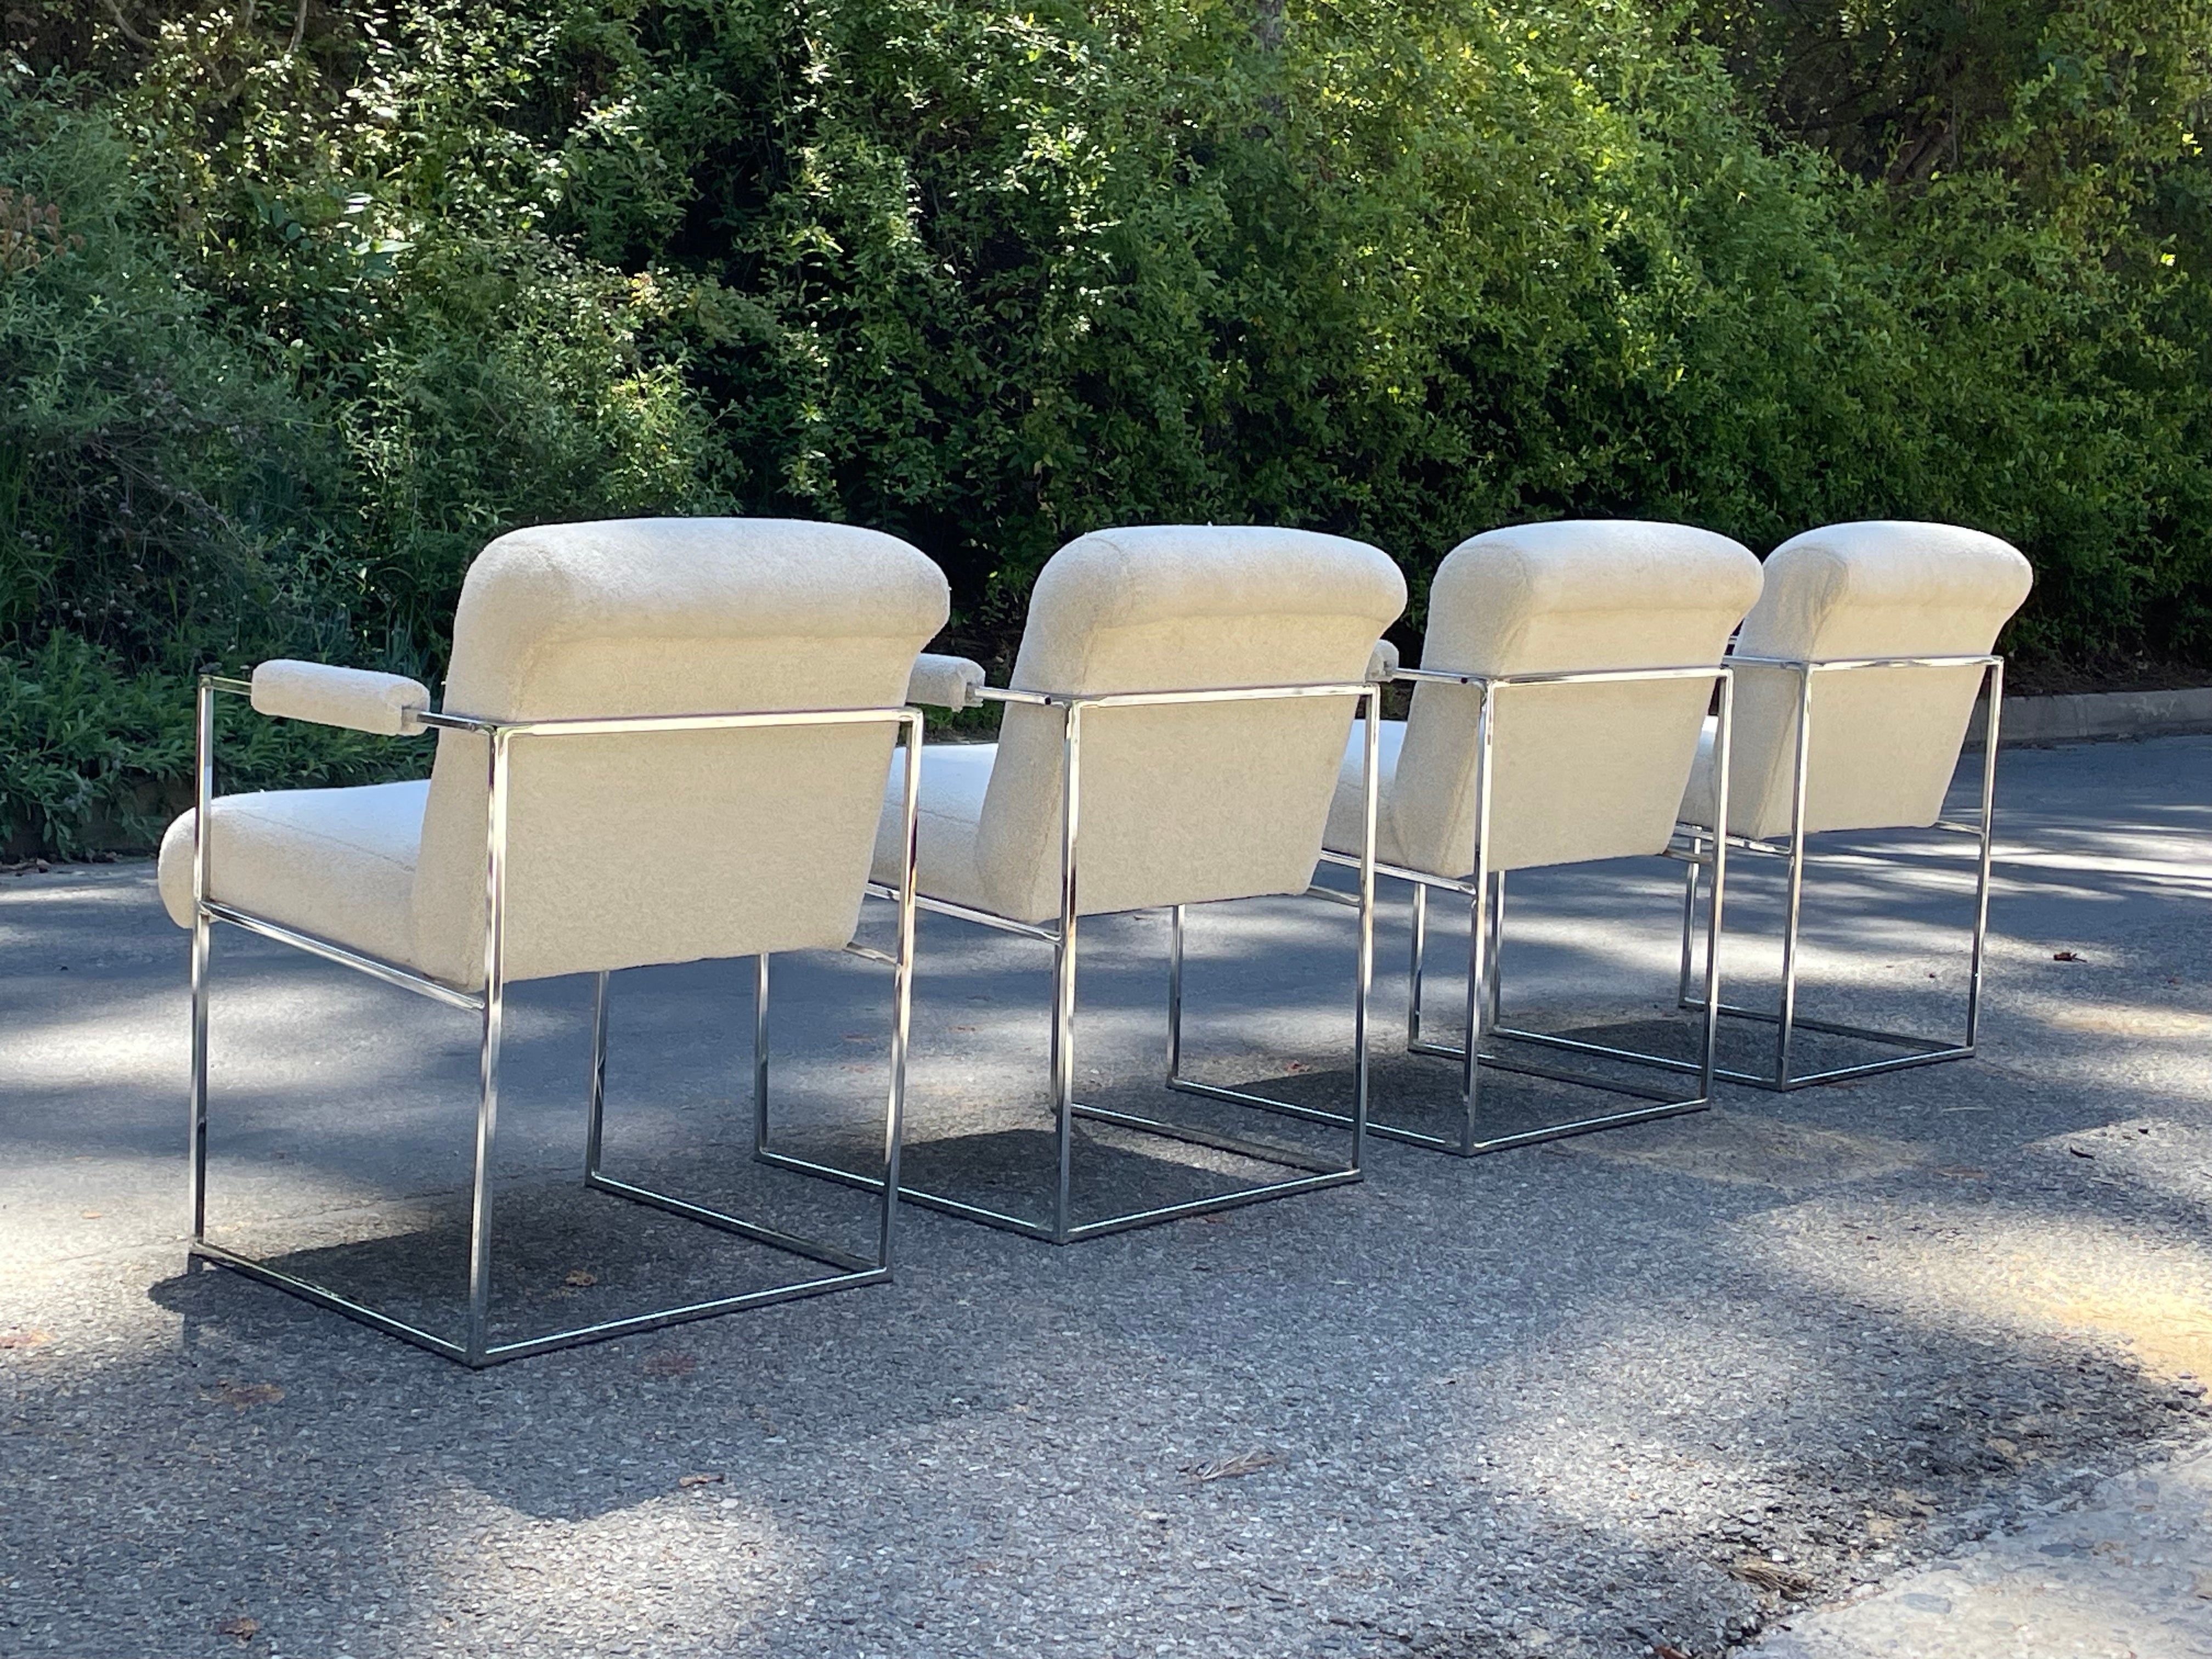 Set of 4 vintage 1960s chrome dining arm chairs by Milo Baughman for Thayer Coggin. Newer boucle fabric.

Can be used for dining or also as side chairs in living room or office.

Price is for the set of 4.

Very good vintage condition with minor